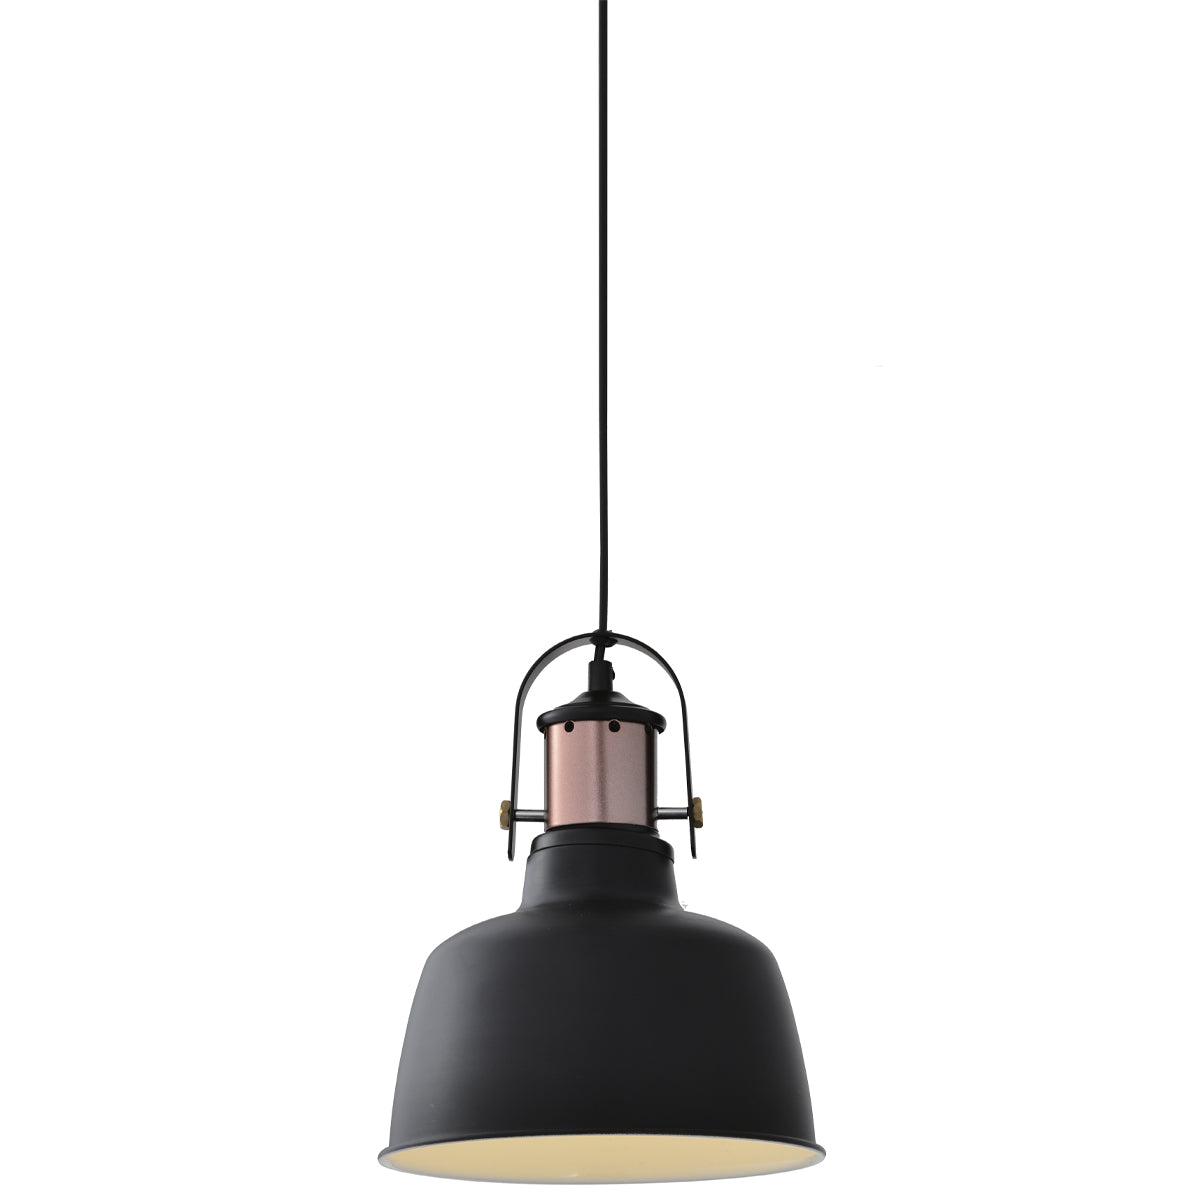 Our Marnie black adjustable dome ceiling pendant light is the perfect addition to any room to add a modern and industrial focal point. The industrial style of this light brings a dark and elegant aesthetic to your interior as the dome shape creates a modern and contemporary appearance. Would look great above a kitchen island or dining table. The height can be adjusted at the time of fitting.